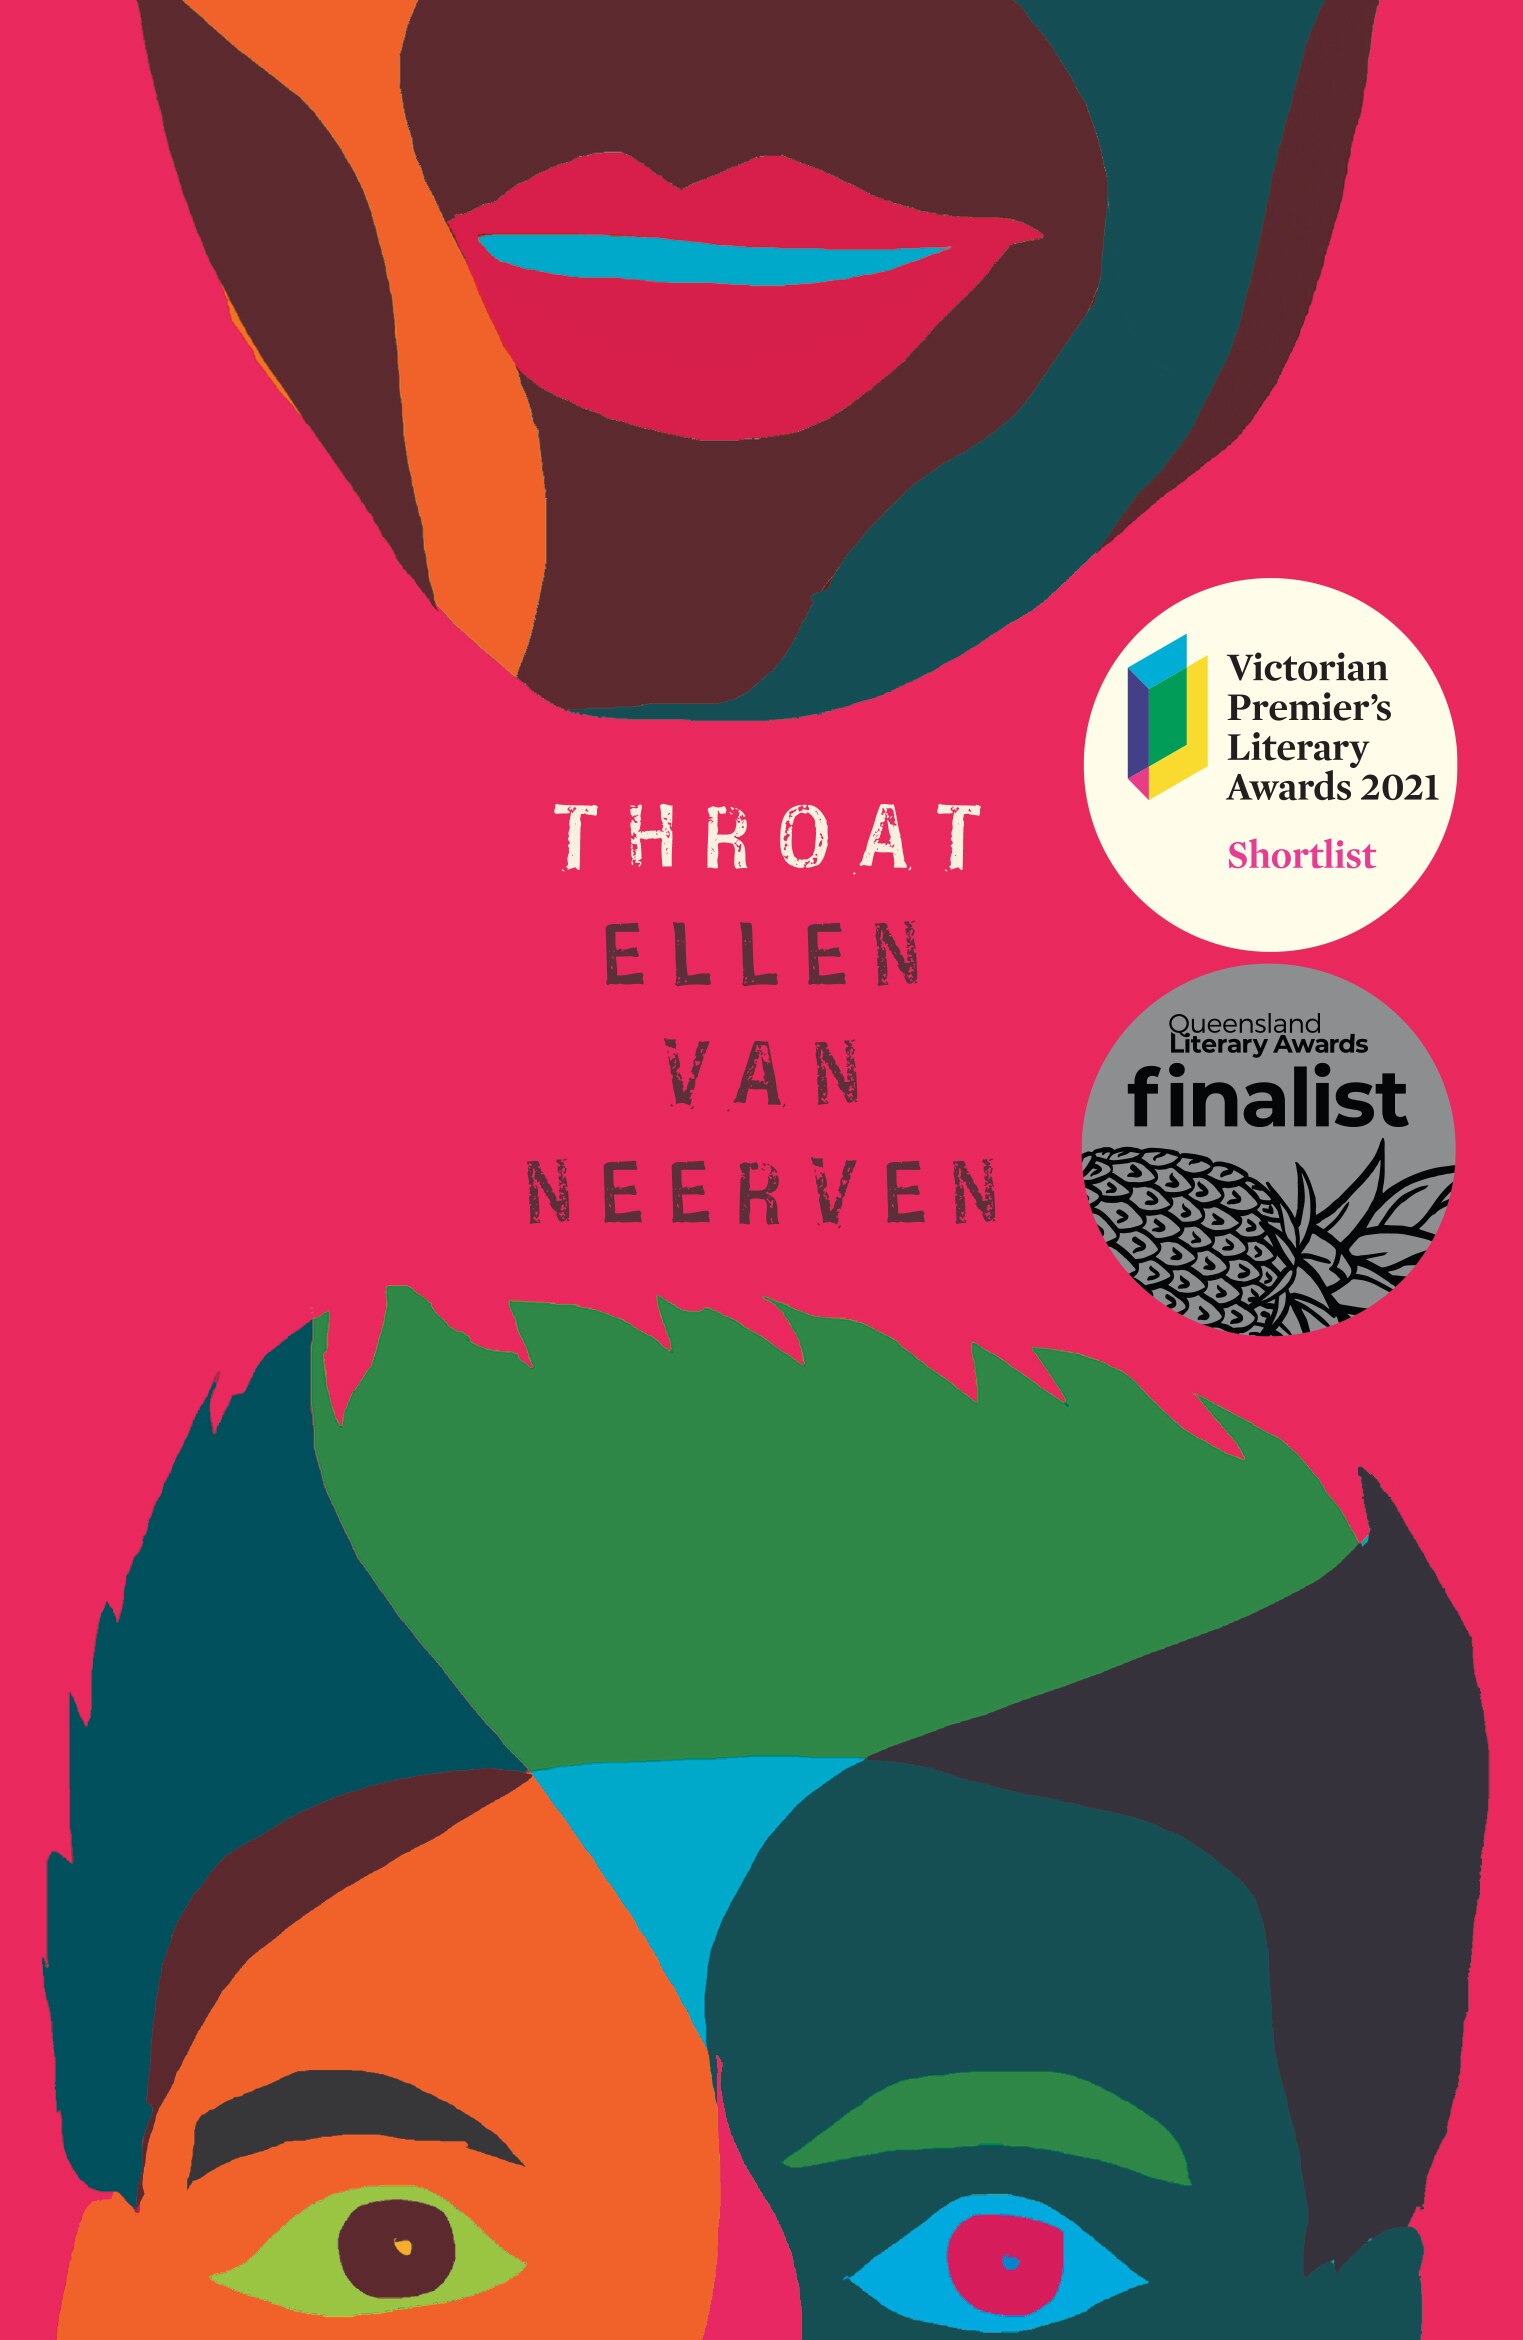 Hot pink background with bright-coloured illustration of face and text: THROAT ELLEN VAN NEERVEN